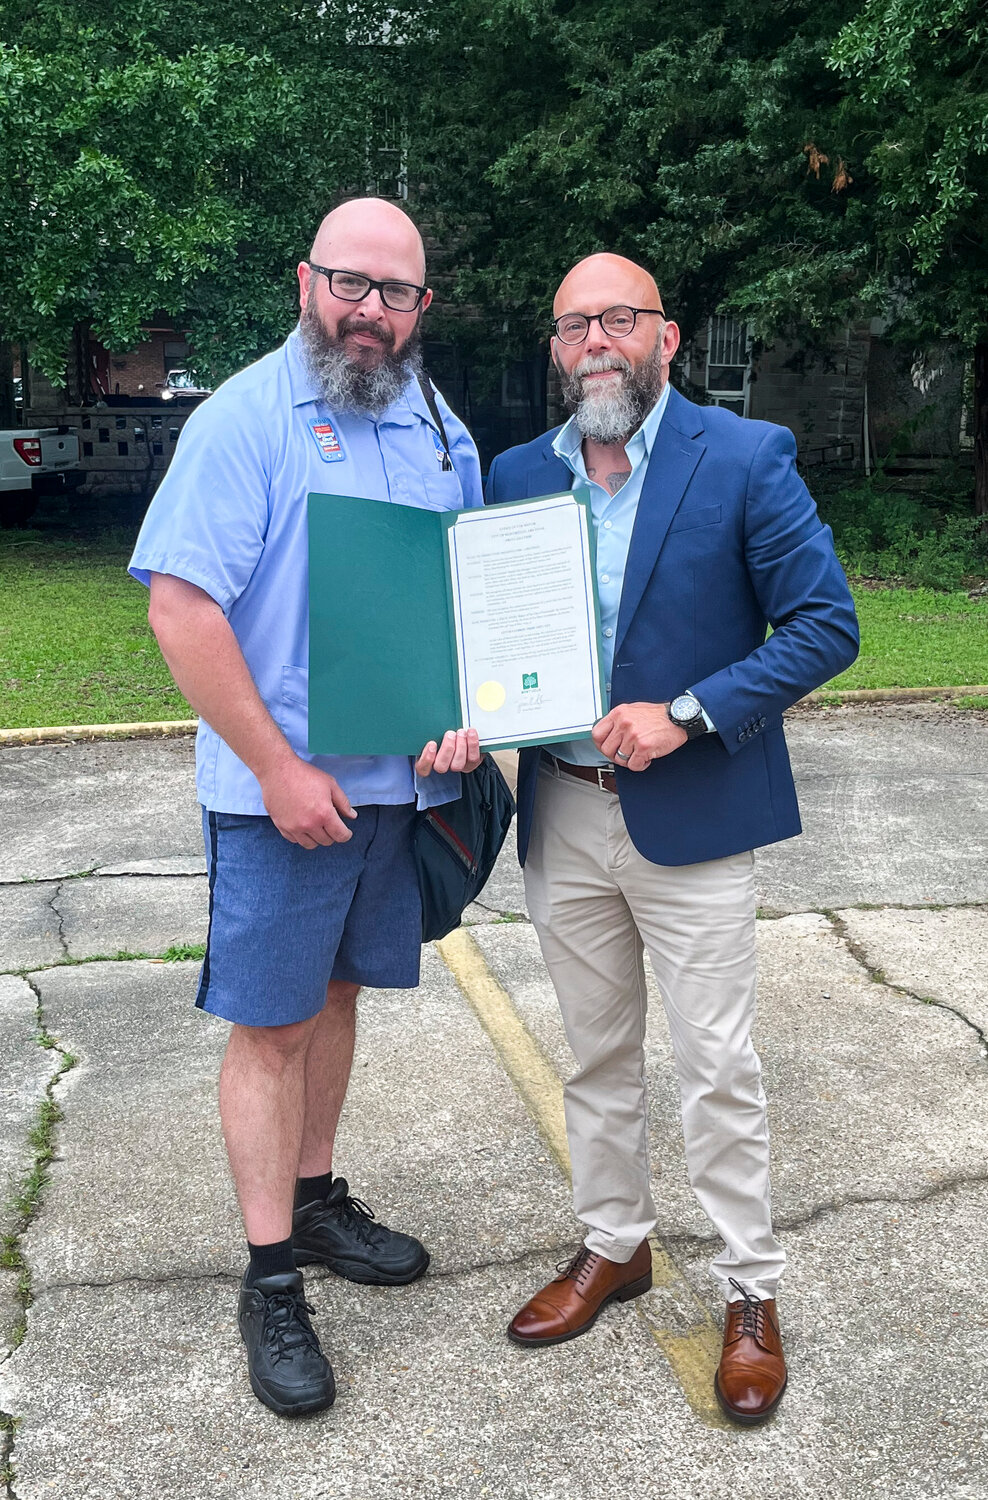 Monticello Mayor Jason Akers (right) presents Michael Burns with a proclamation recognizing the Stamp Out Hunger Food Drive which is carried out each year by postal workers across the United States on the second Saturday in May.